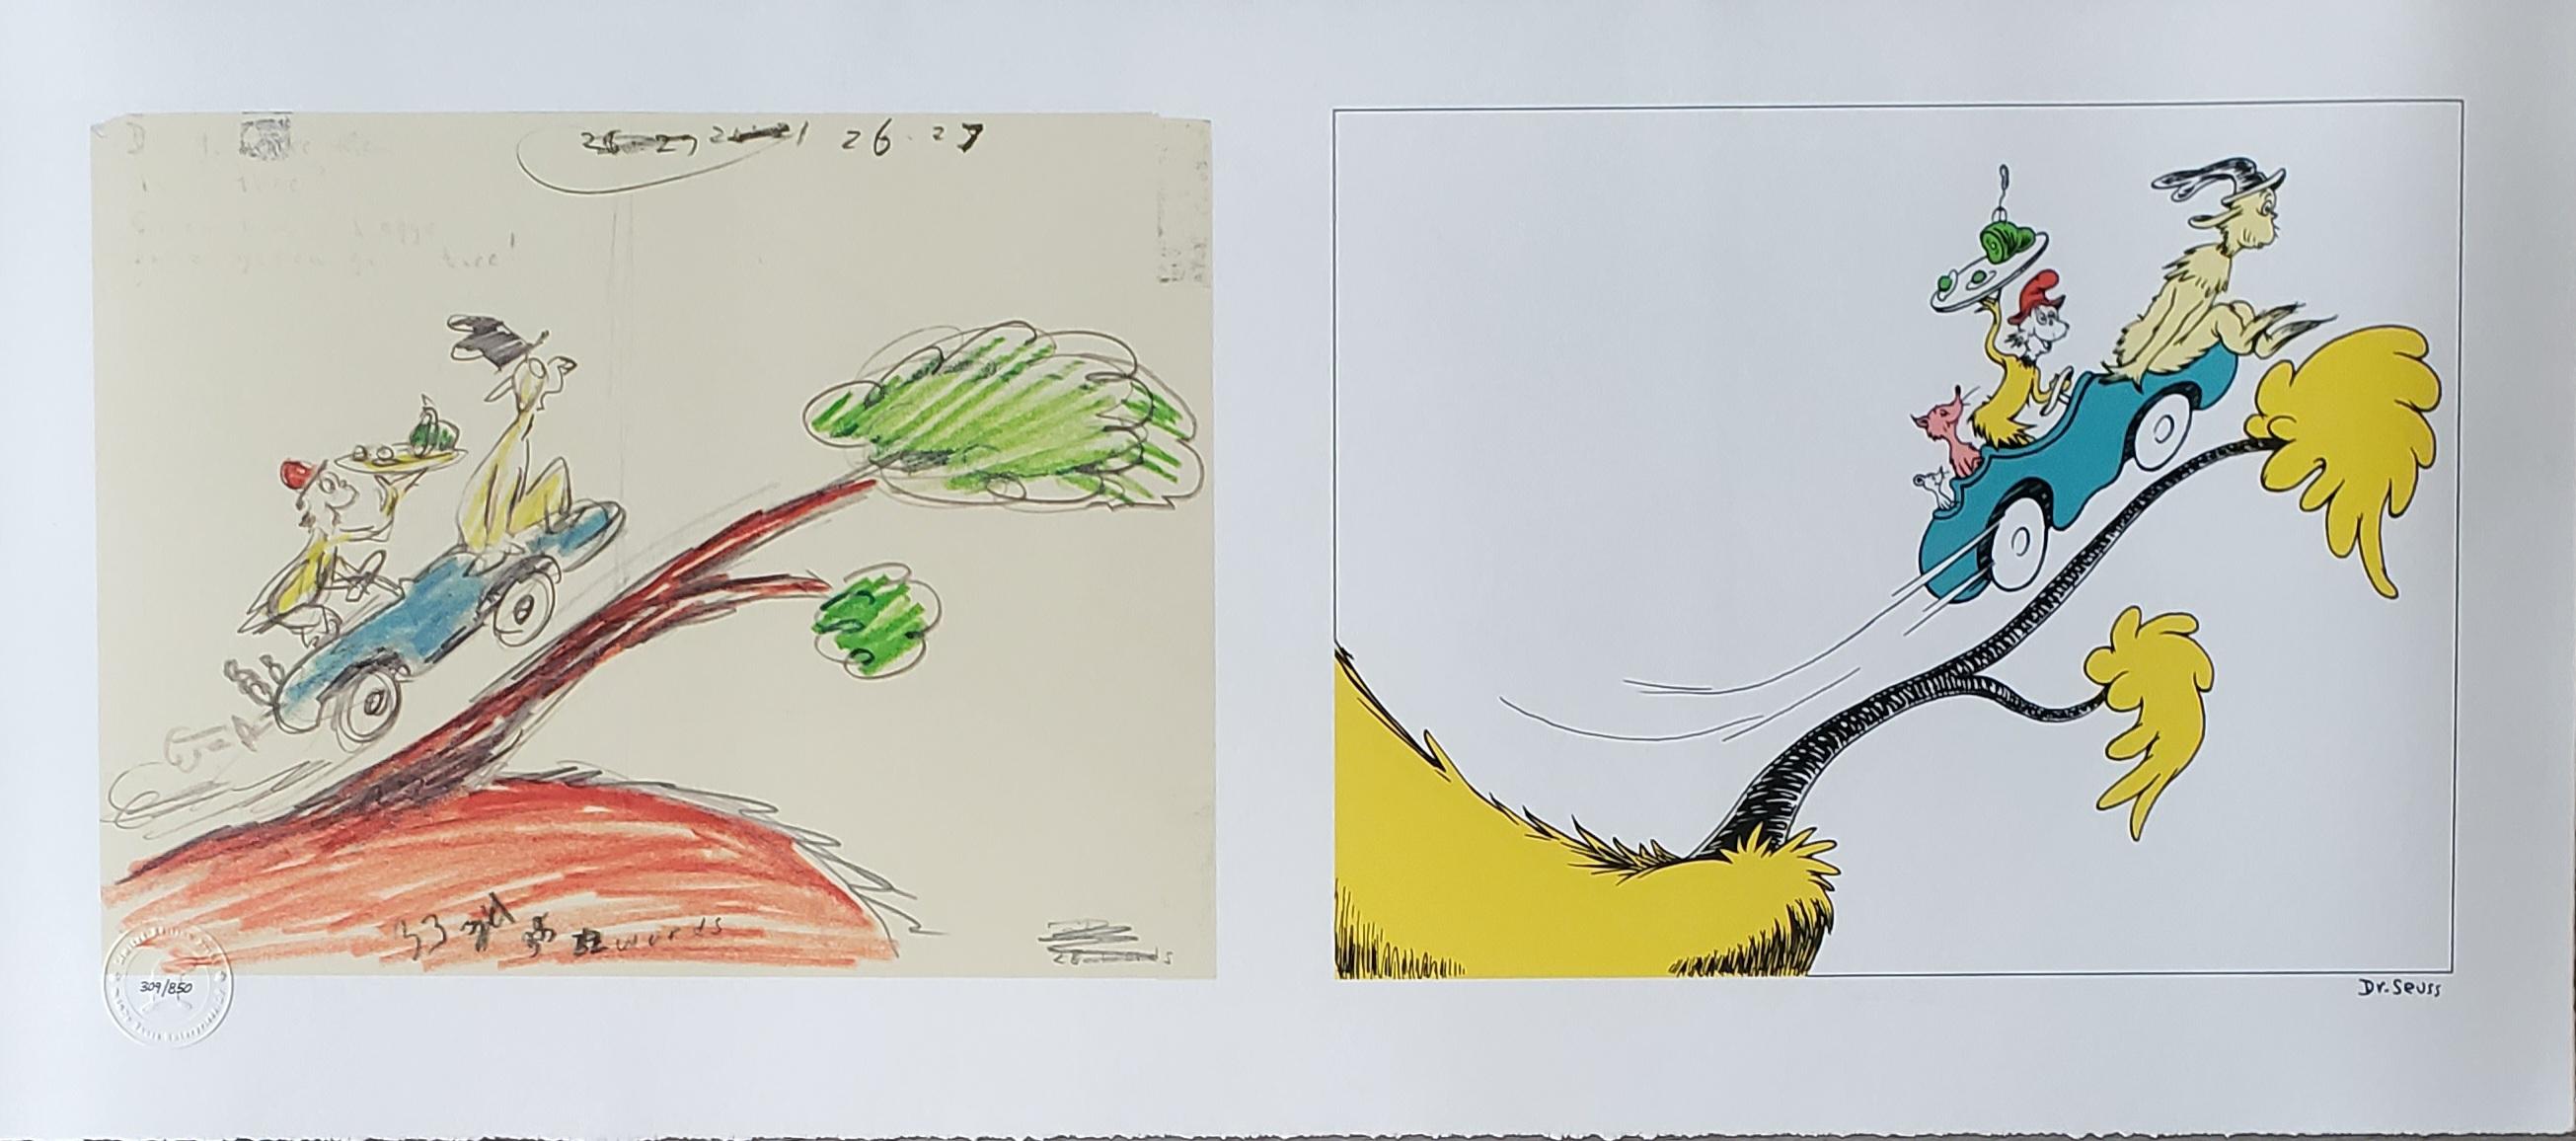 DR SUESS 'You May Like Them in A Tree! Diptych - Print by Dr. Seuss (Theodore Geisel)